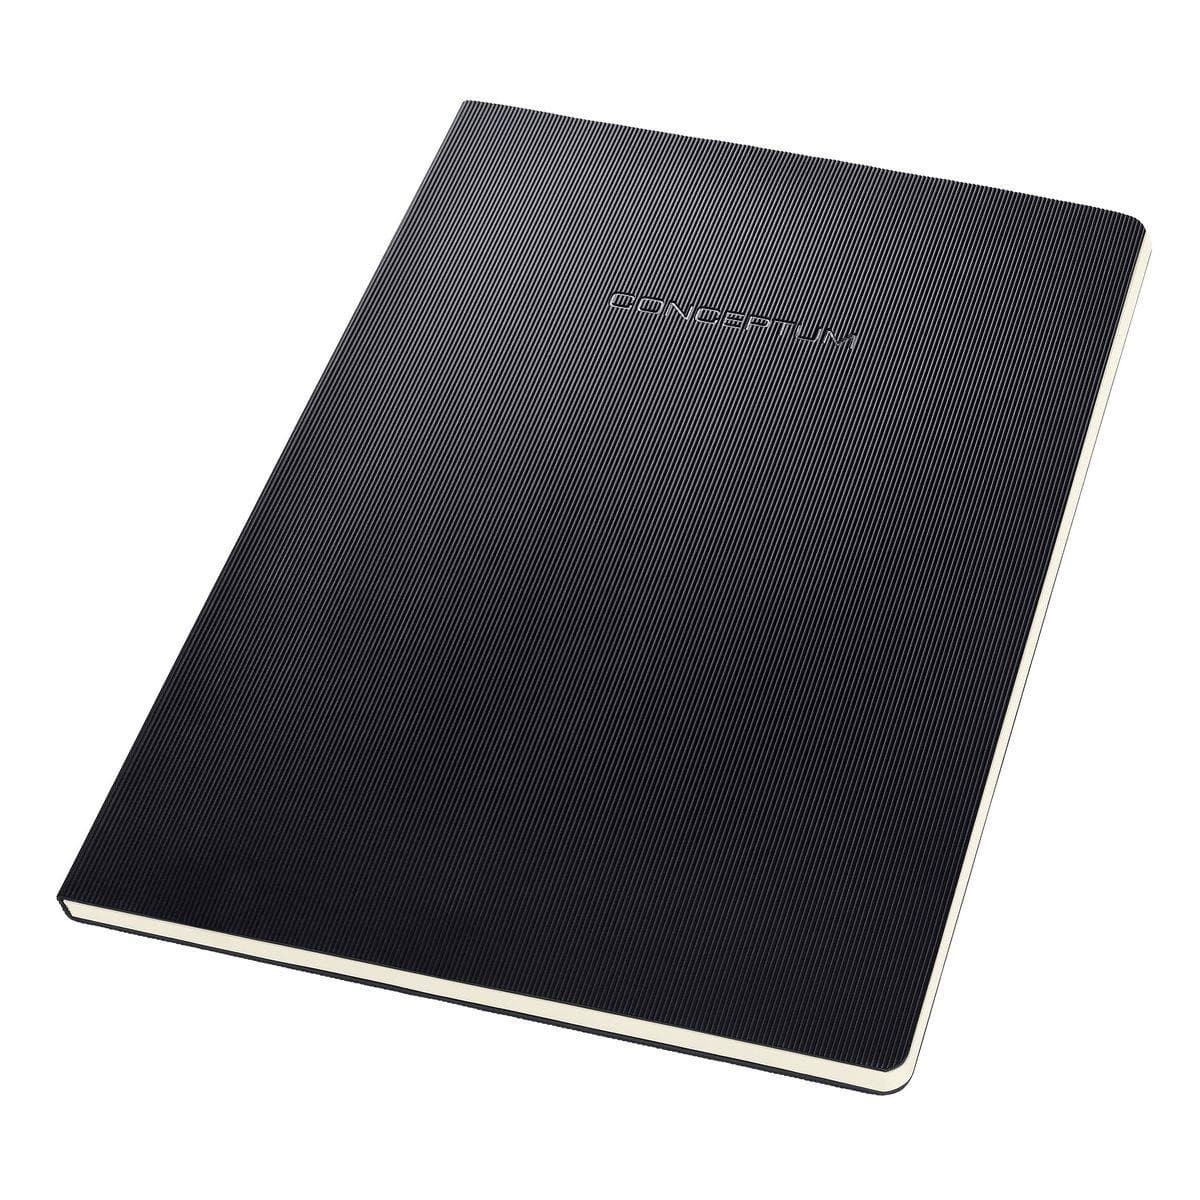 Sigel Notepad CONCEPTUM A4, Softcover, Lined, Black